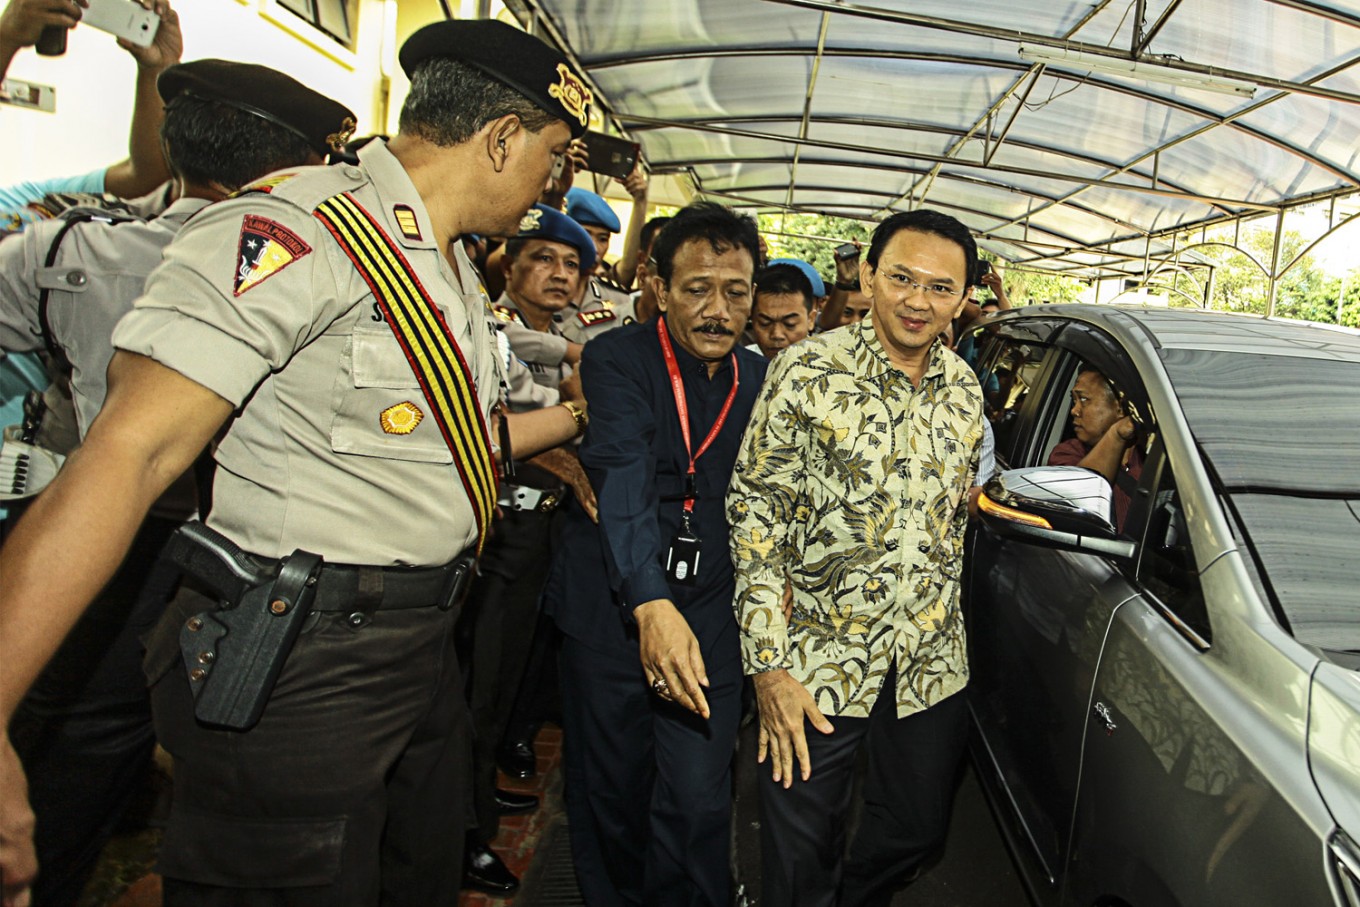 Jakarta Police to reroute traffic during Ahok’s trial - City - The